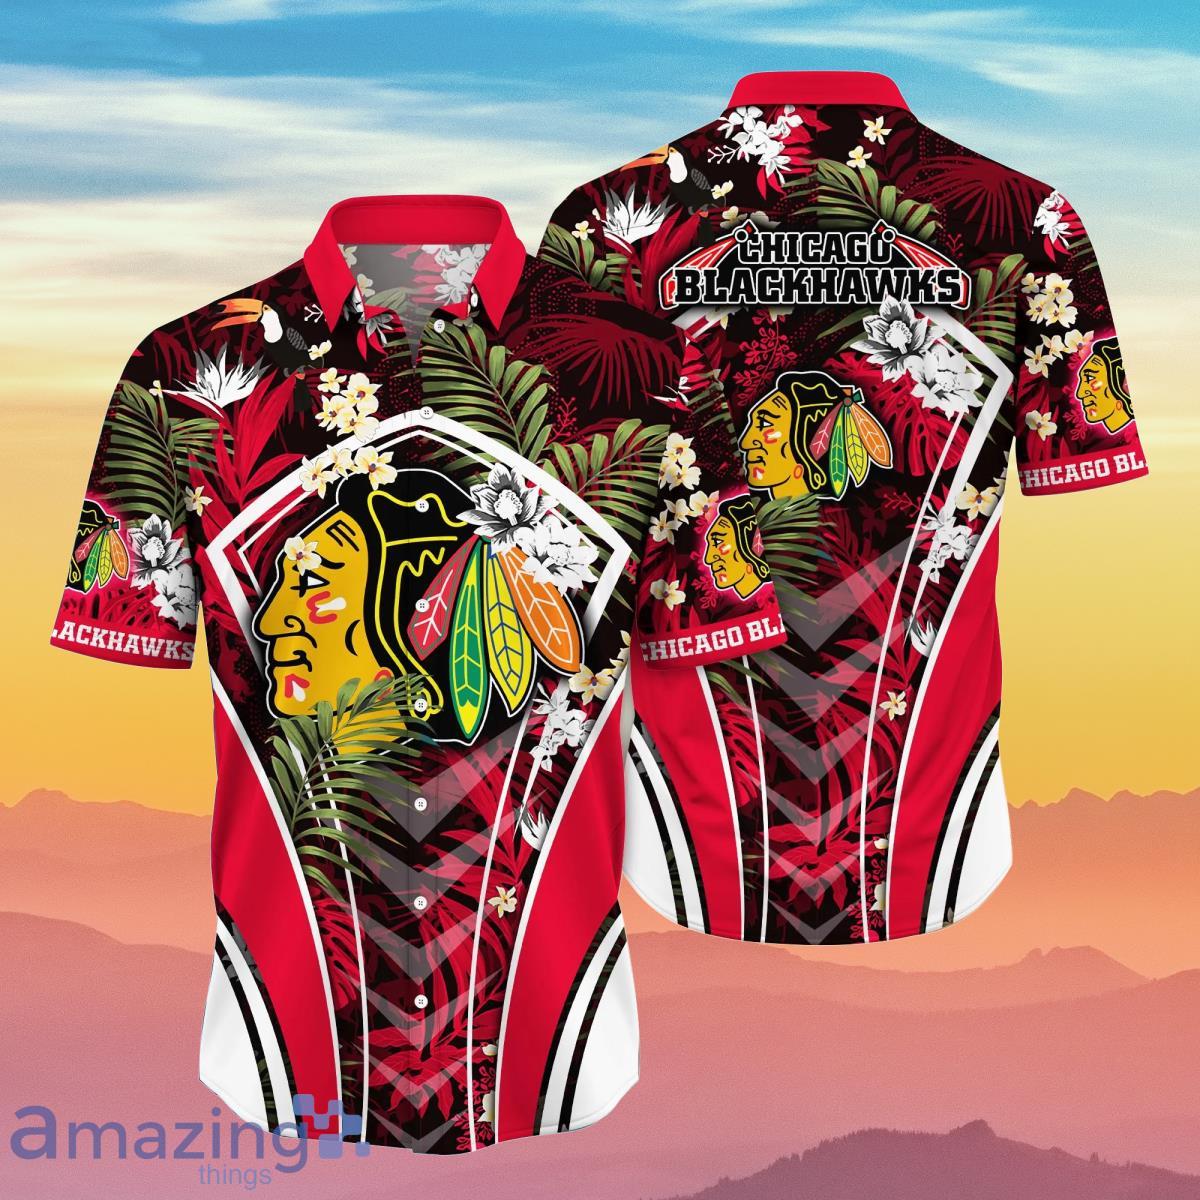 Custom Hockey Jerseys with a Blackhawk Logo and Shoulder Patches